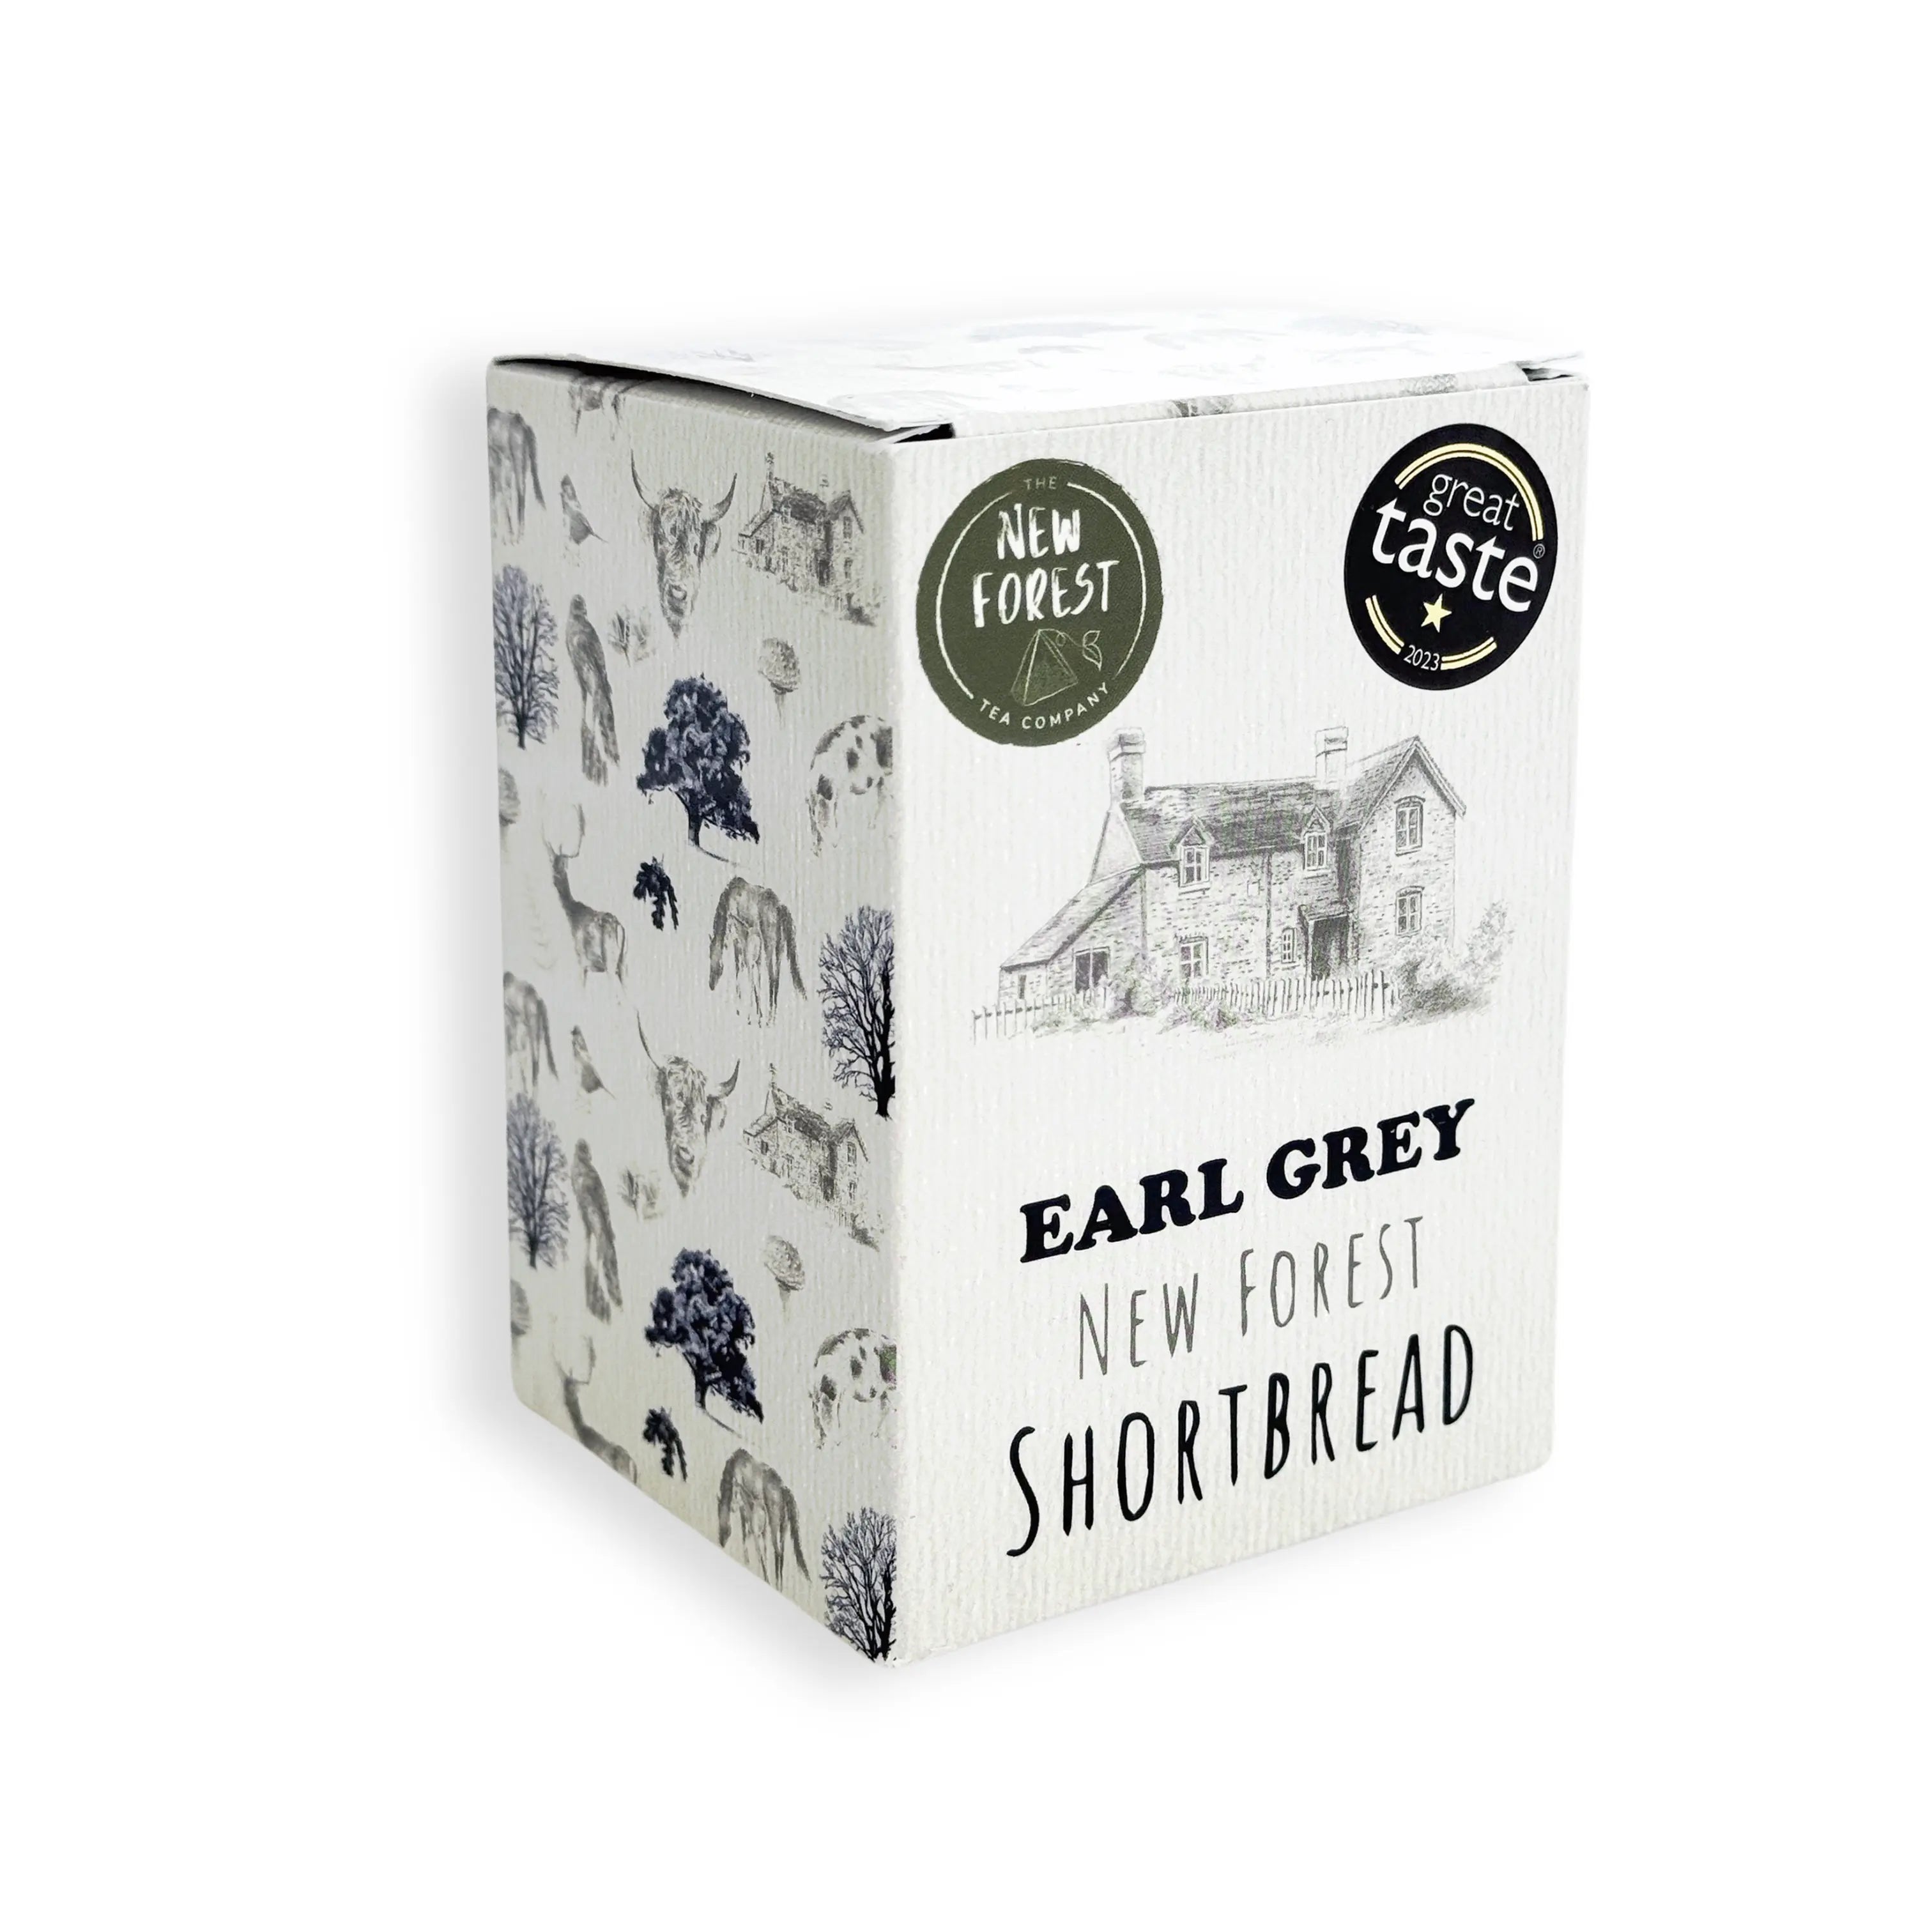 Elevate your snacking experience with this gourmet delightful Earl Grey New Forest Shortbread, ideal for tea-time gatherings or thoughtful gifting occasions. Savor the rich flavors and delicate texture of these handmade delights, sure to satisfy cravings and awaken taste buds.